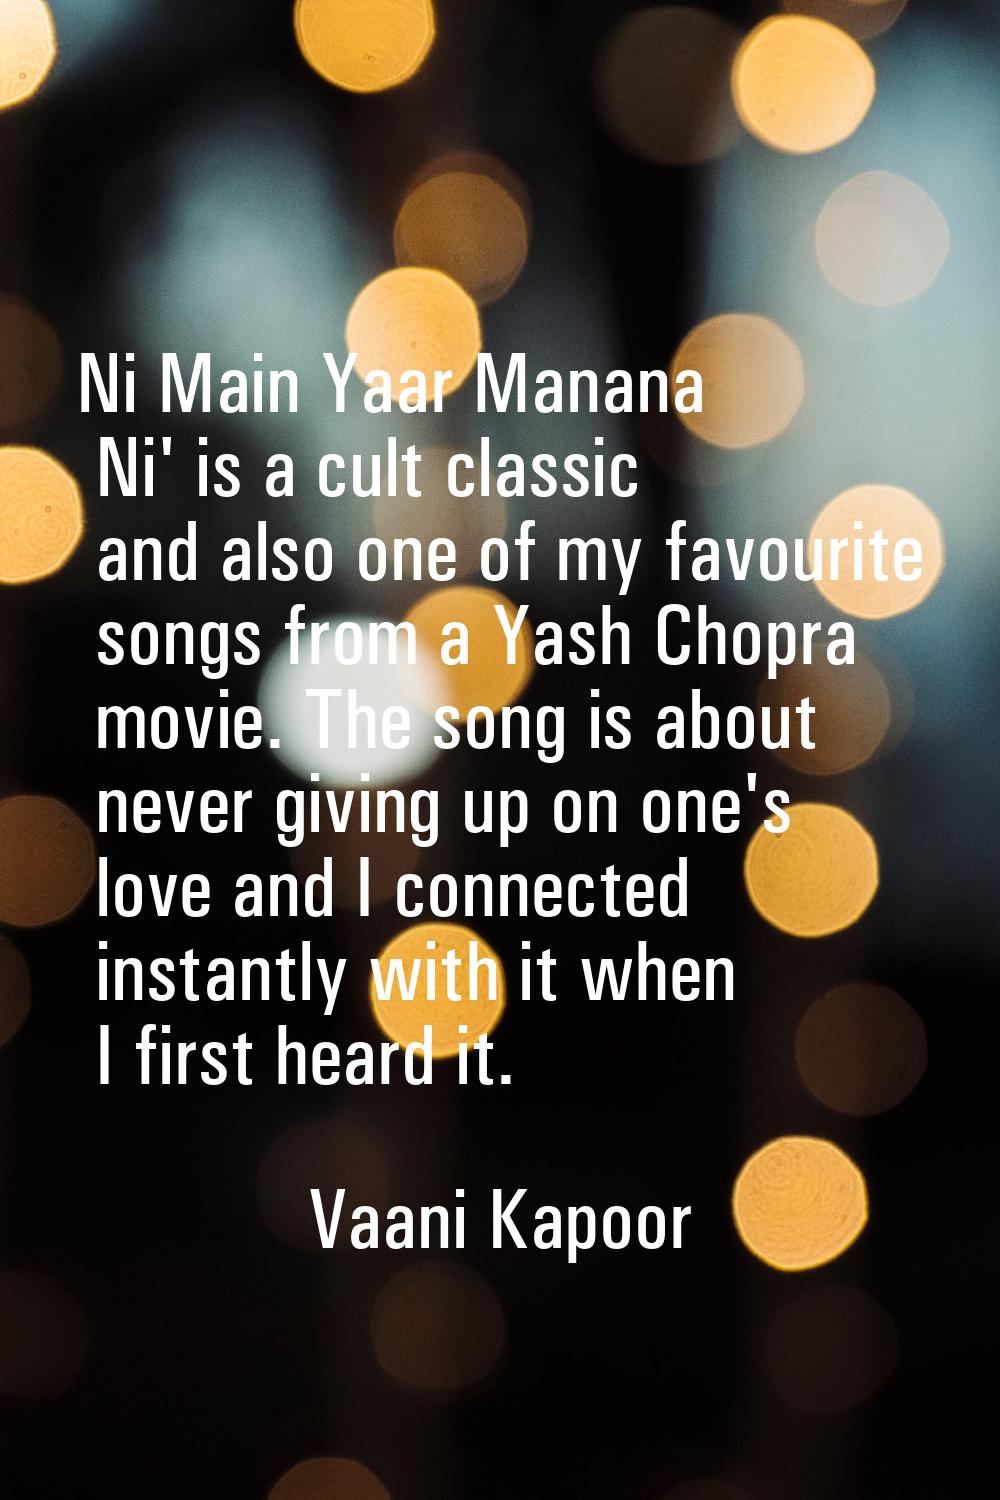 Ni Main Yaar Manana Ni' is a cult classic and also one of my favourite songs from a Yash Chopra mov